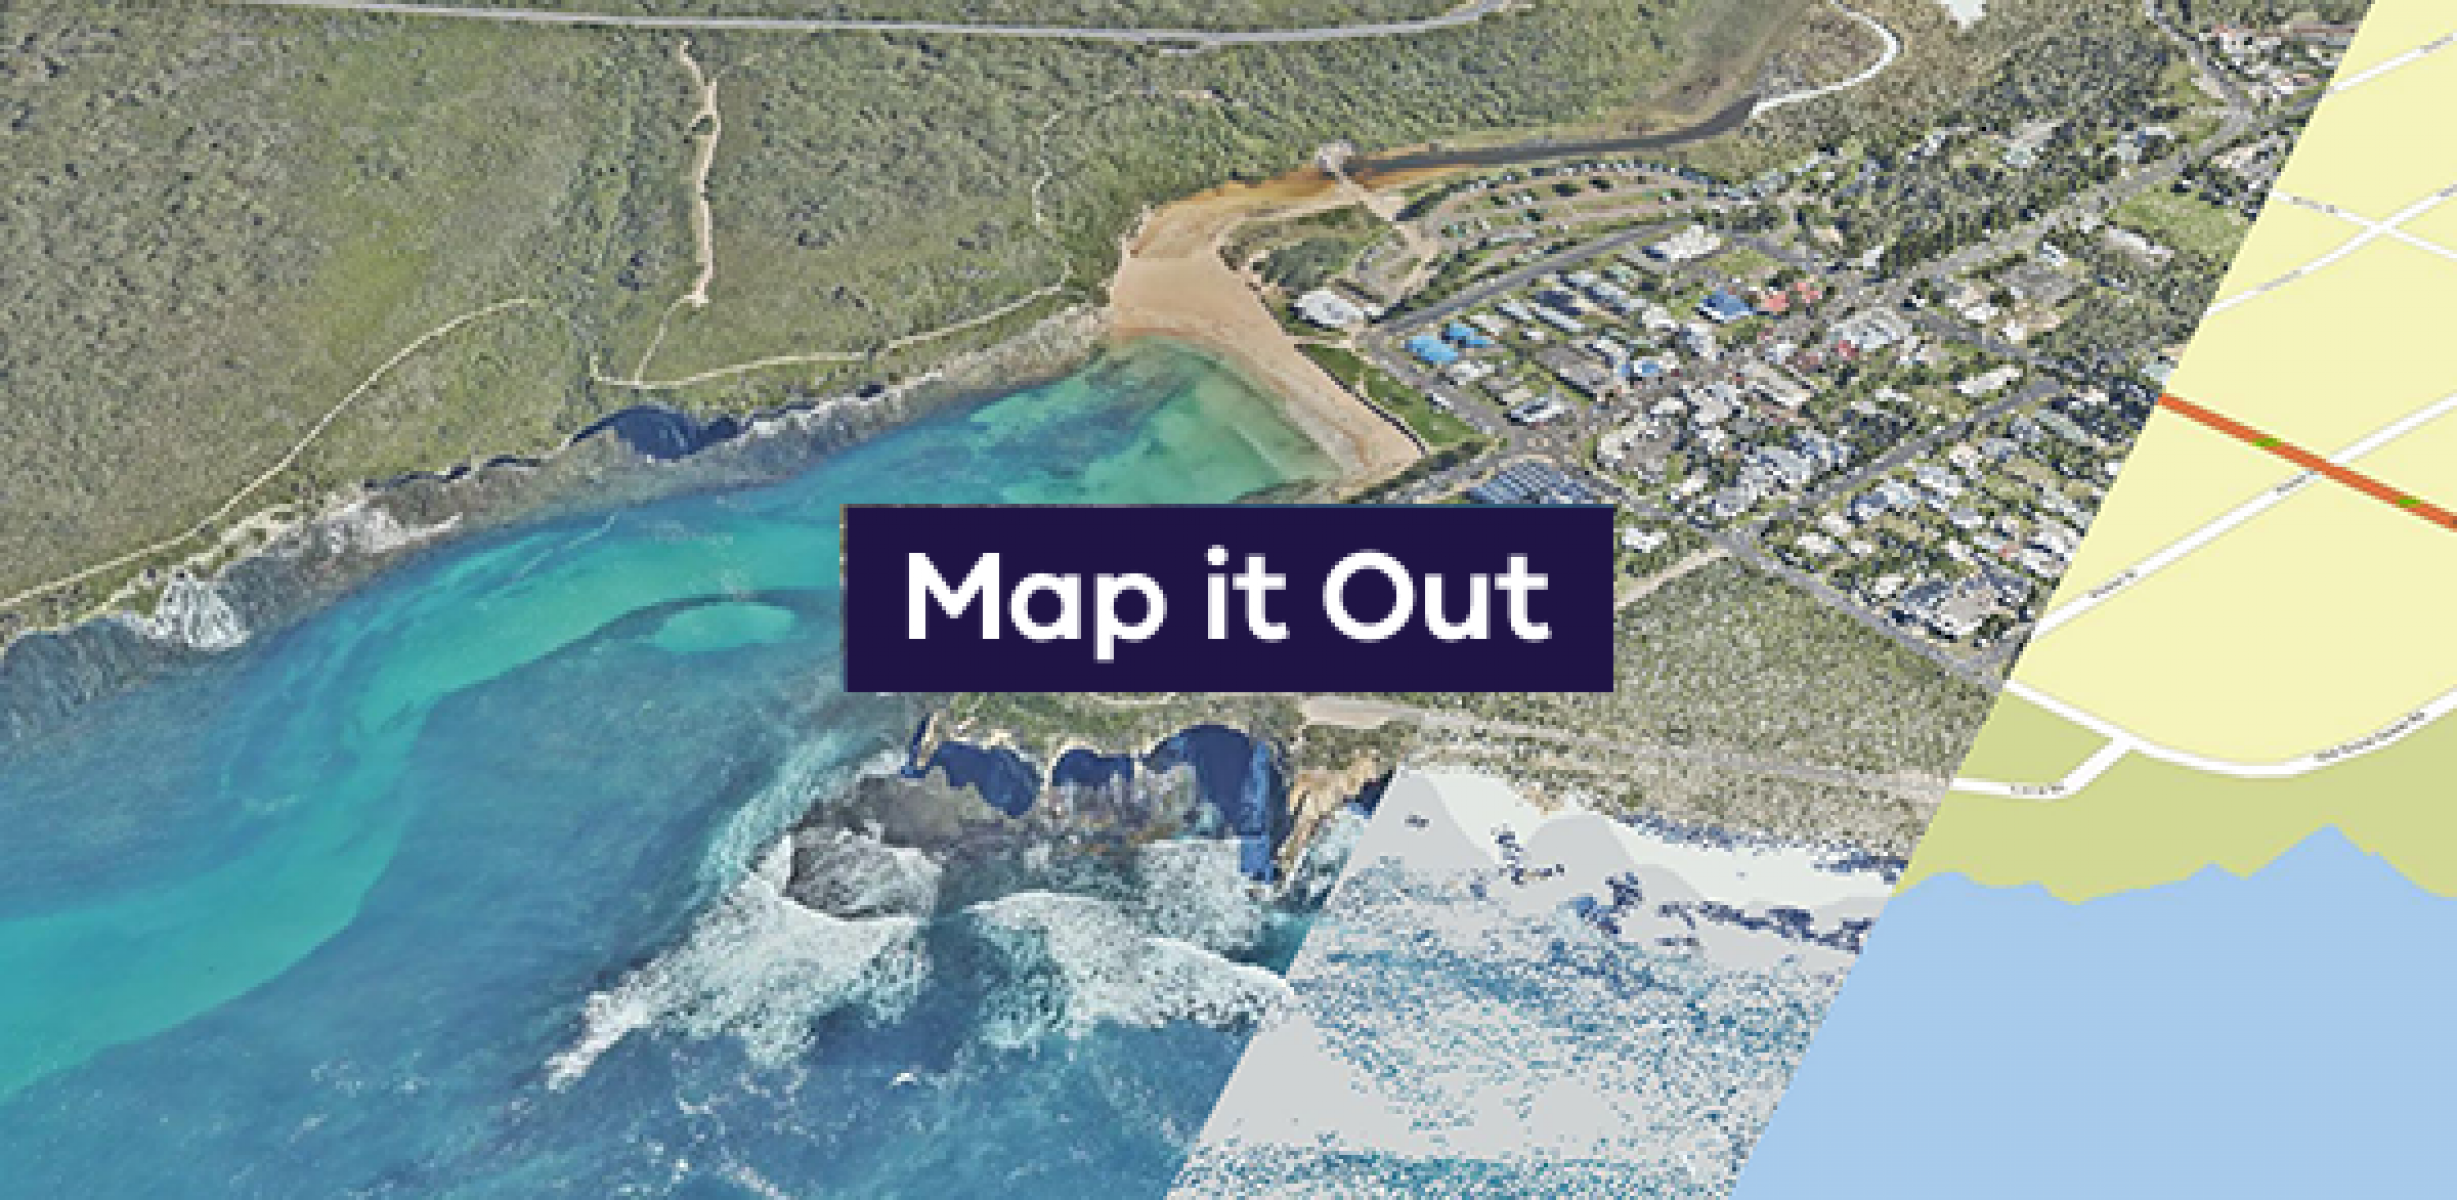 Map it Out: spatial and surveying news from across the Victorian Public Service